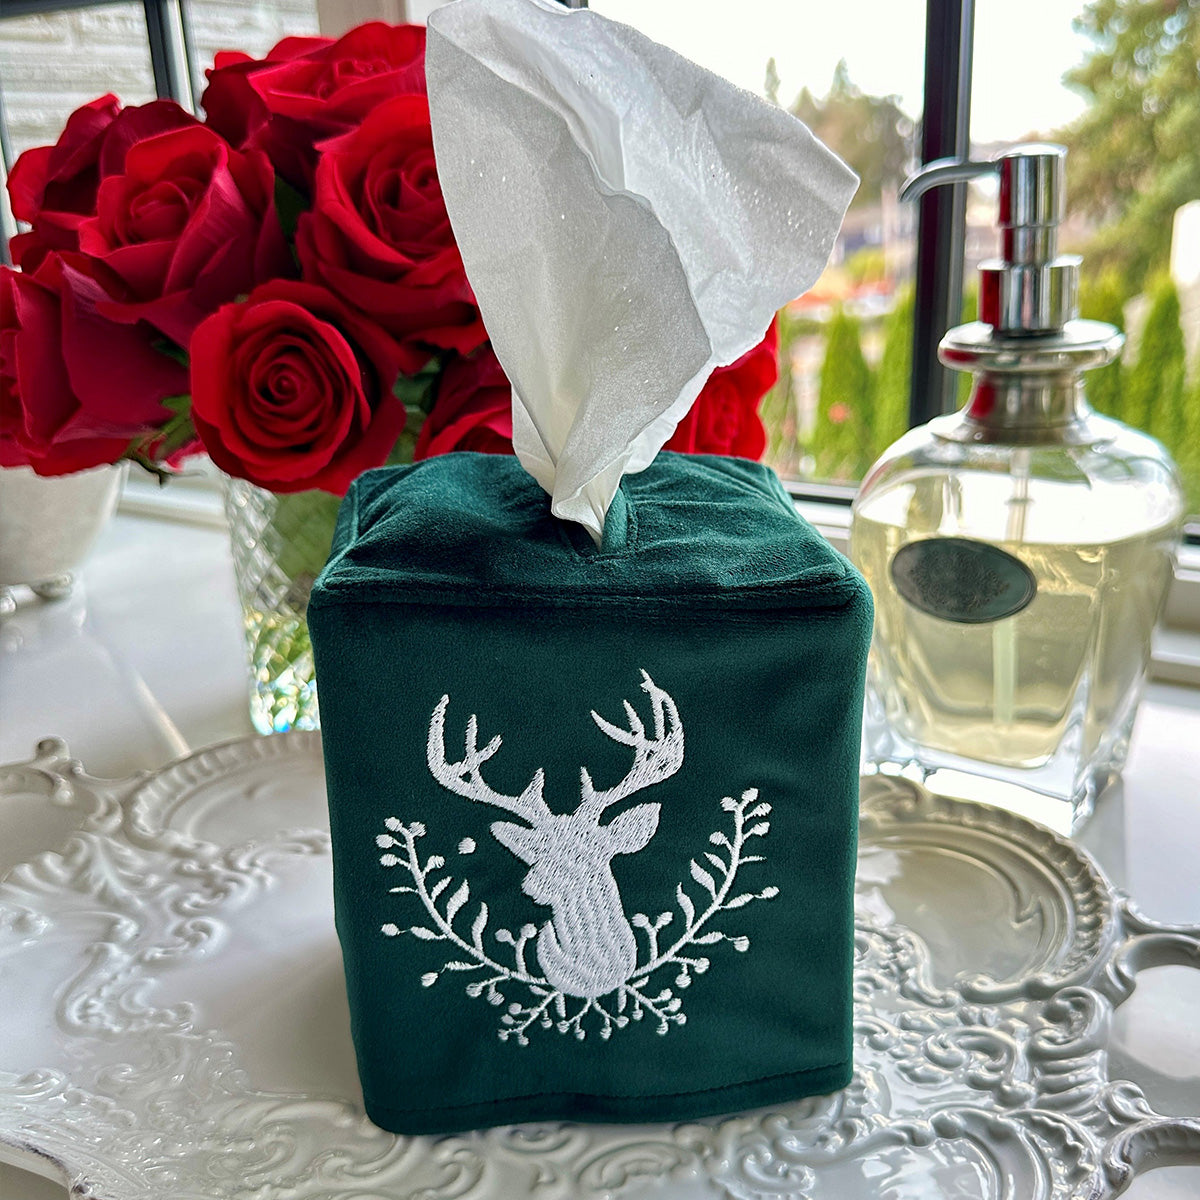 Stag with Holly Berries Velvet Tissue Box Cover